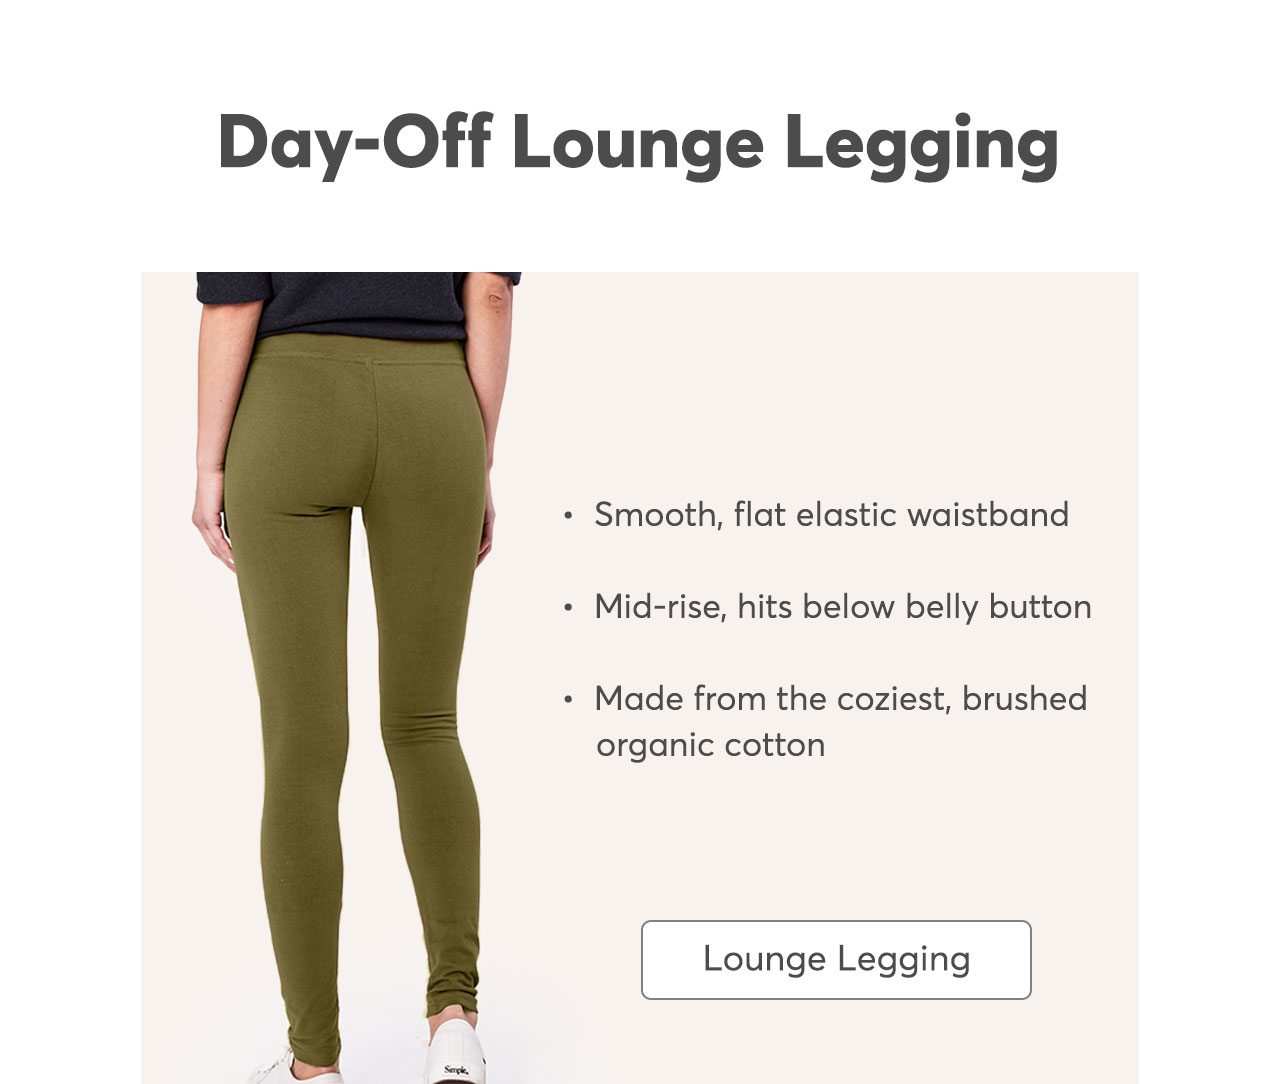 Shop our Day-Off Lounge Legging